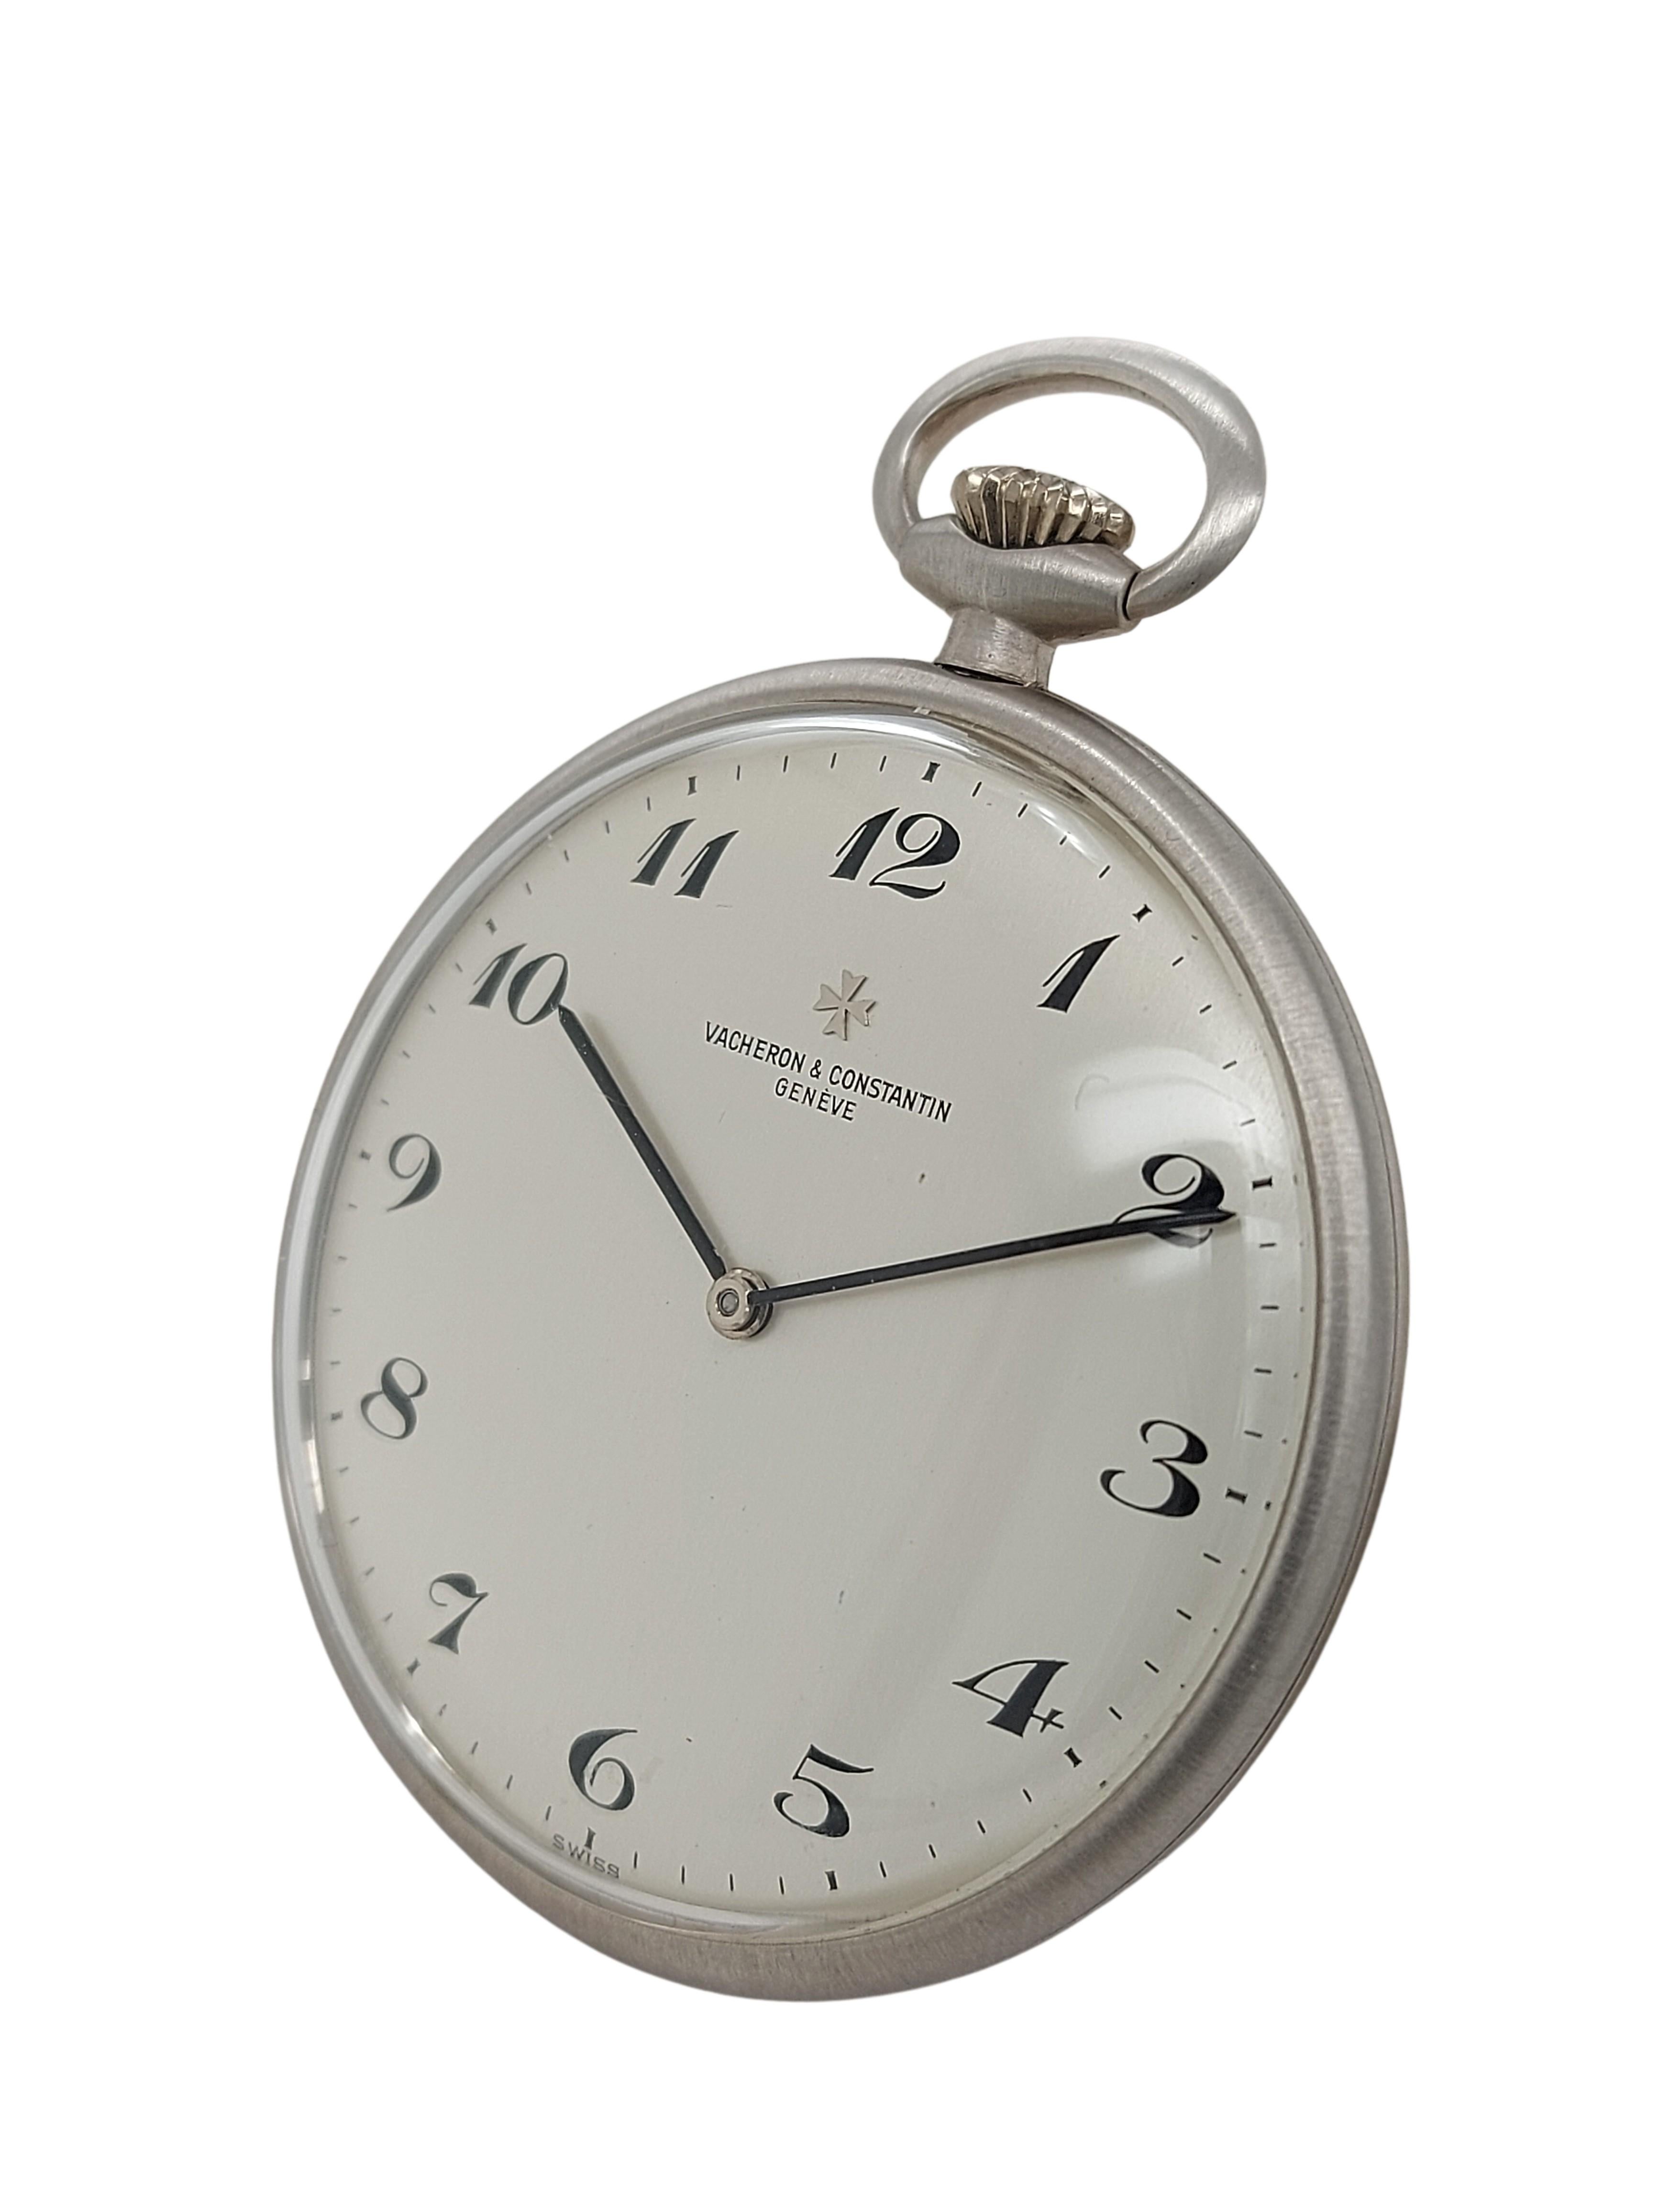 Vintage 18kt White Gold Vacheron Constantin Pocket Watch, Ref 7874, Cal K453

Rare and collectable

Reference: 7874

Calibre: K453/3BW STAMPED QUALITY MARK

Case material: 18kt solid white gold, round, diameter 41 mm 

Dial colour: Silver, Black